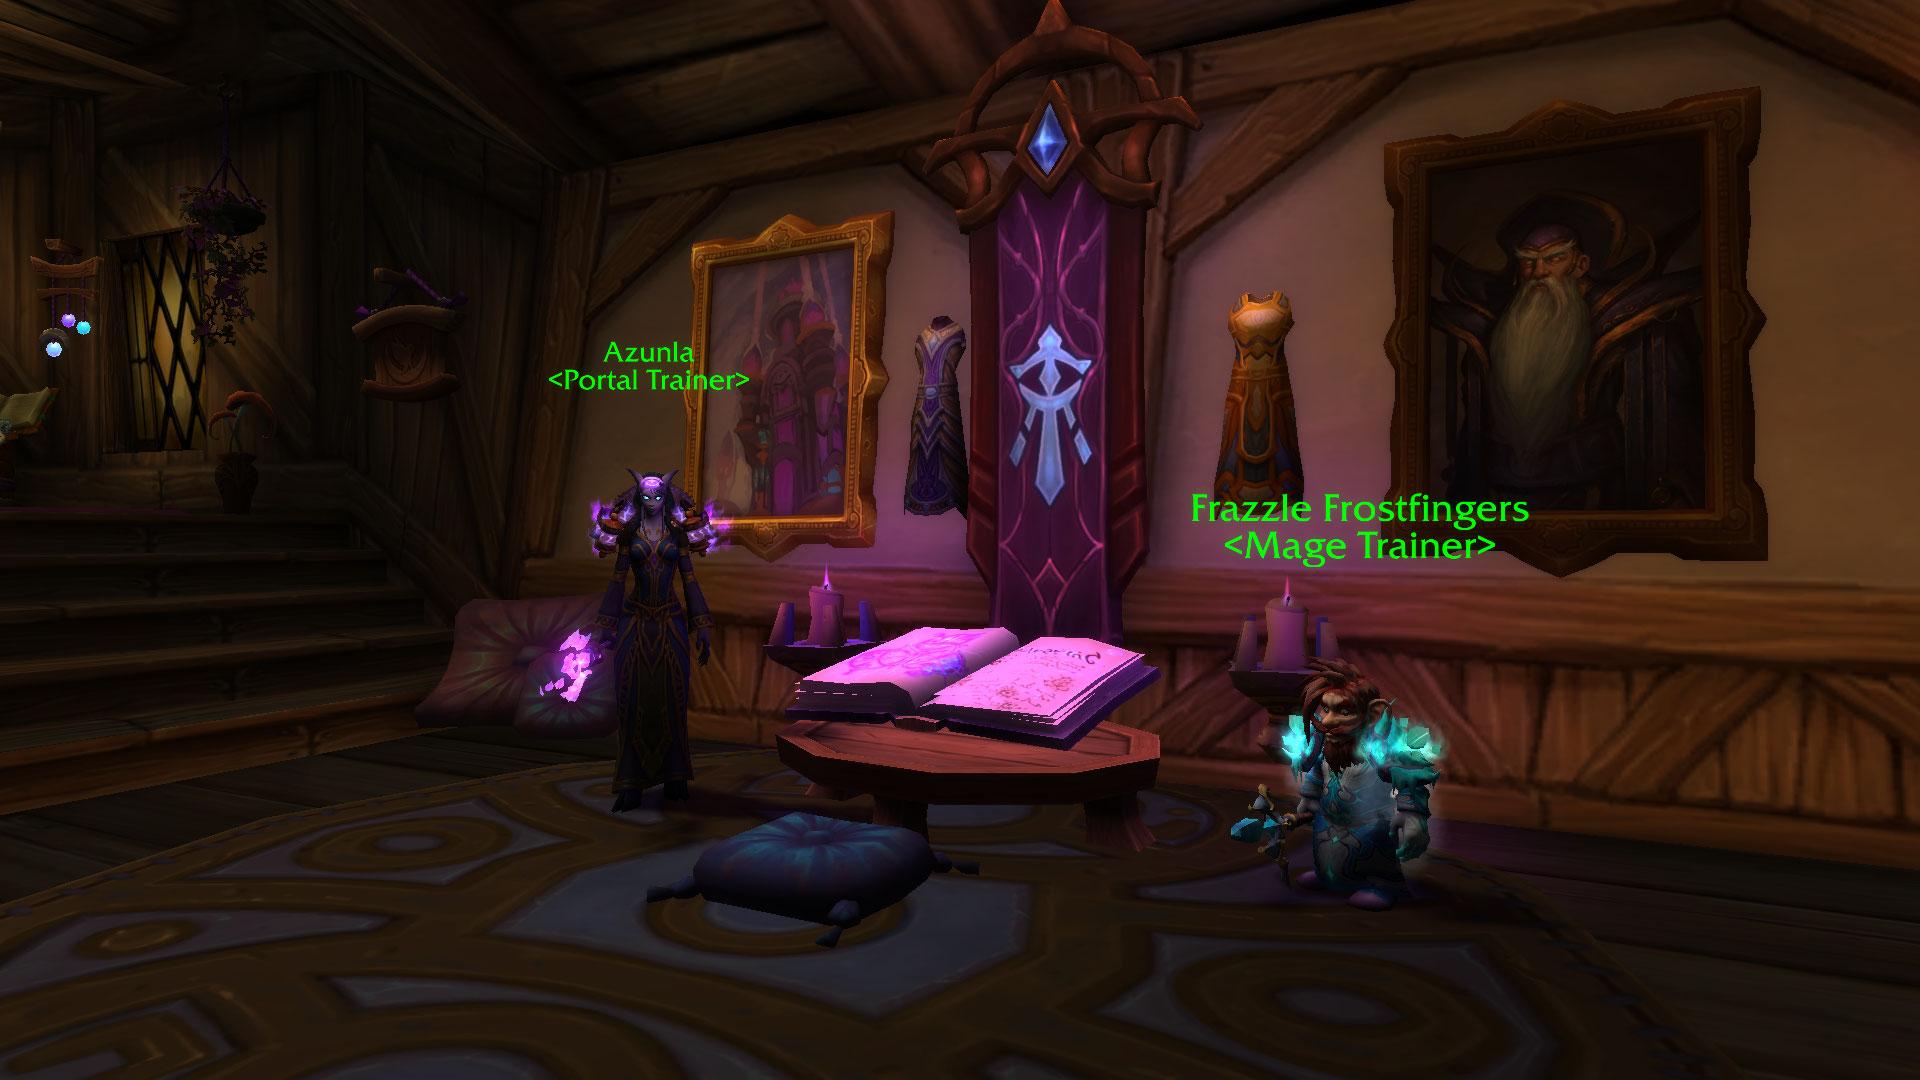 The Stormwind Portal Room has also been updated with a portal that leads to...